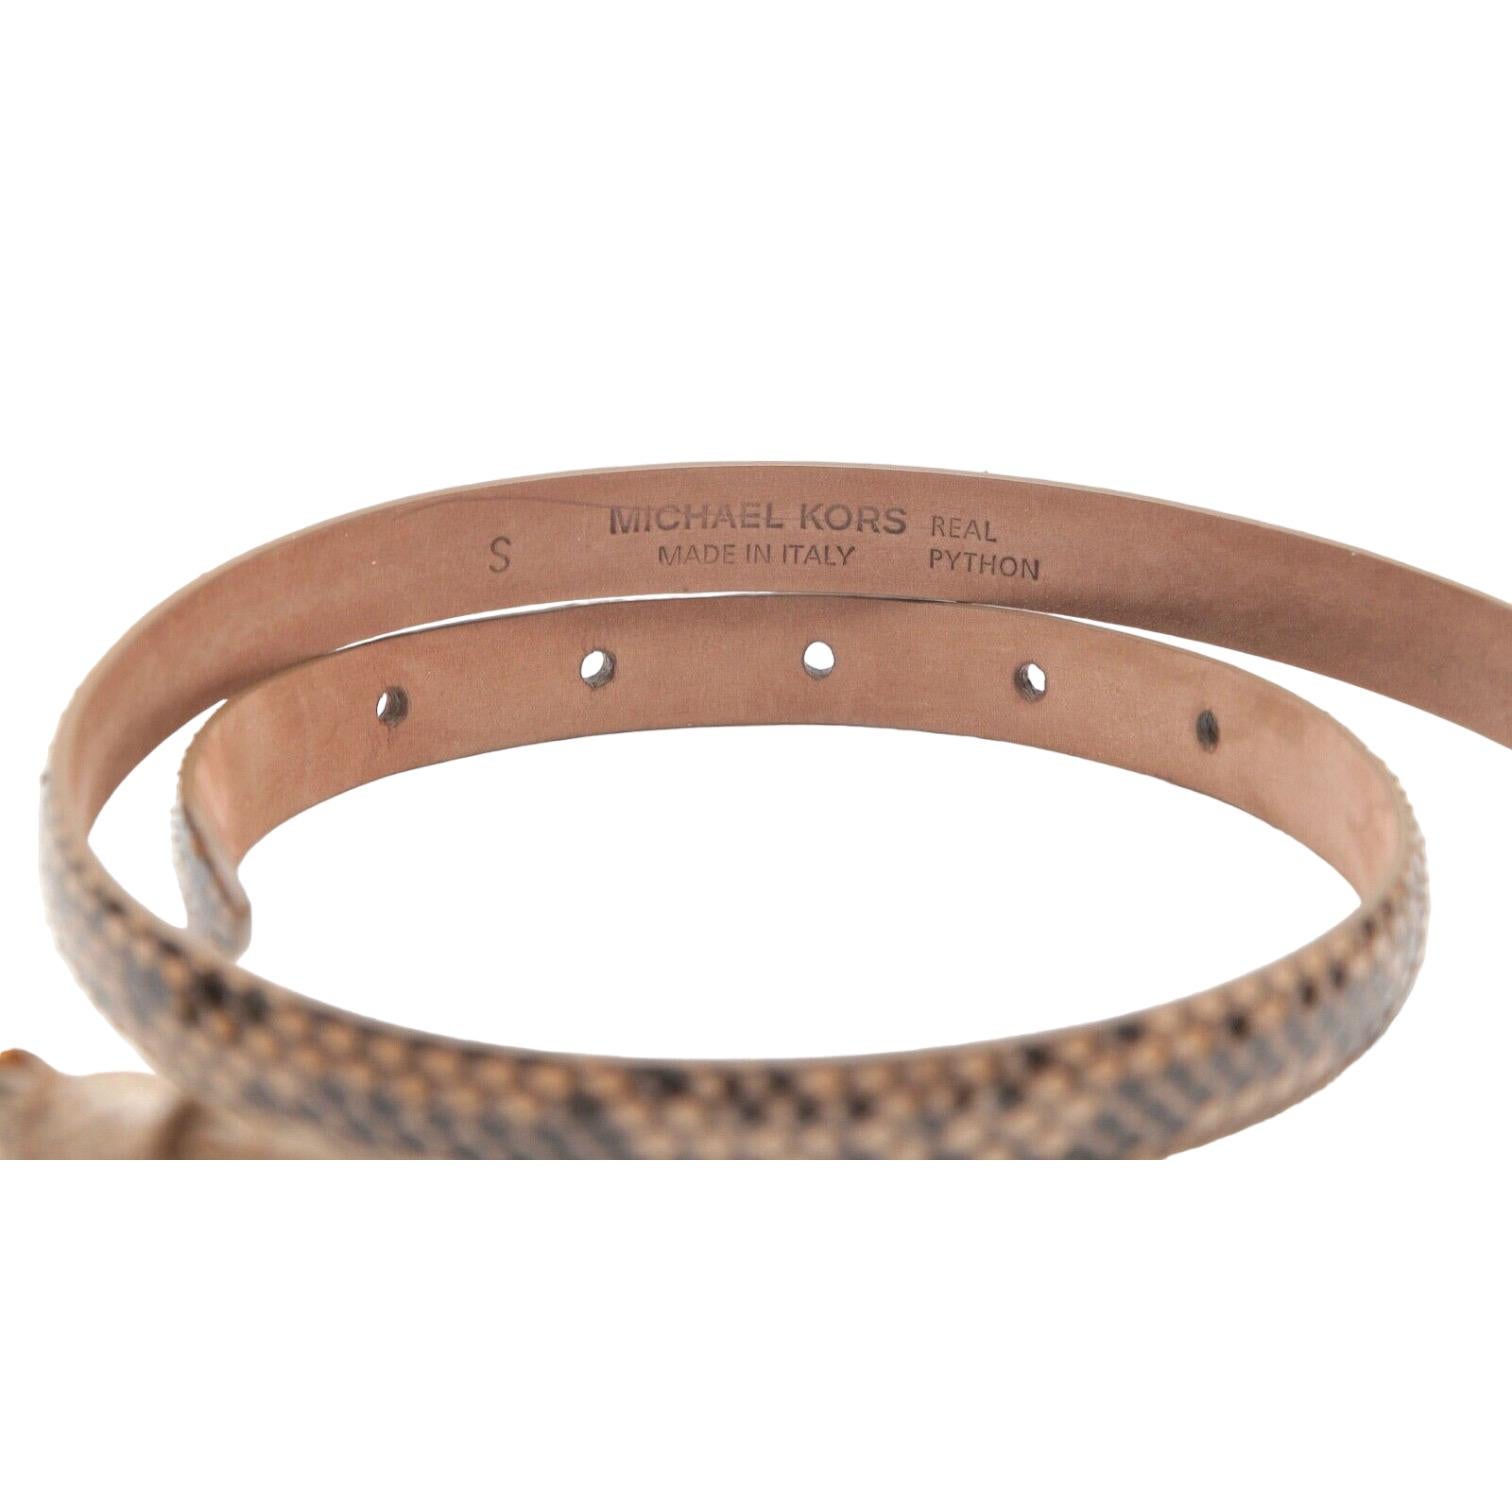 MICHAEL KORS Thin Skinny BELT Exotic Leather Brown Gold HW Buckle S In New Condition For Sale In Hollywood, FL